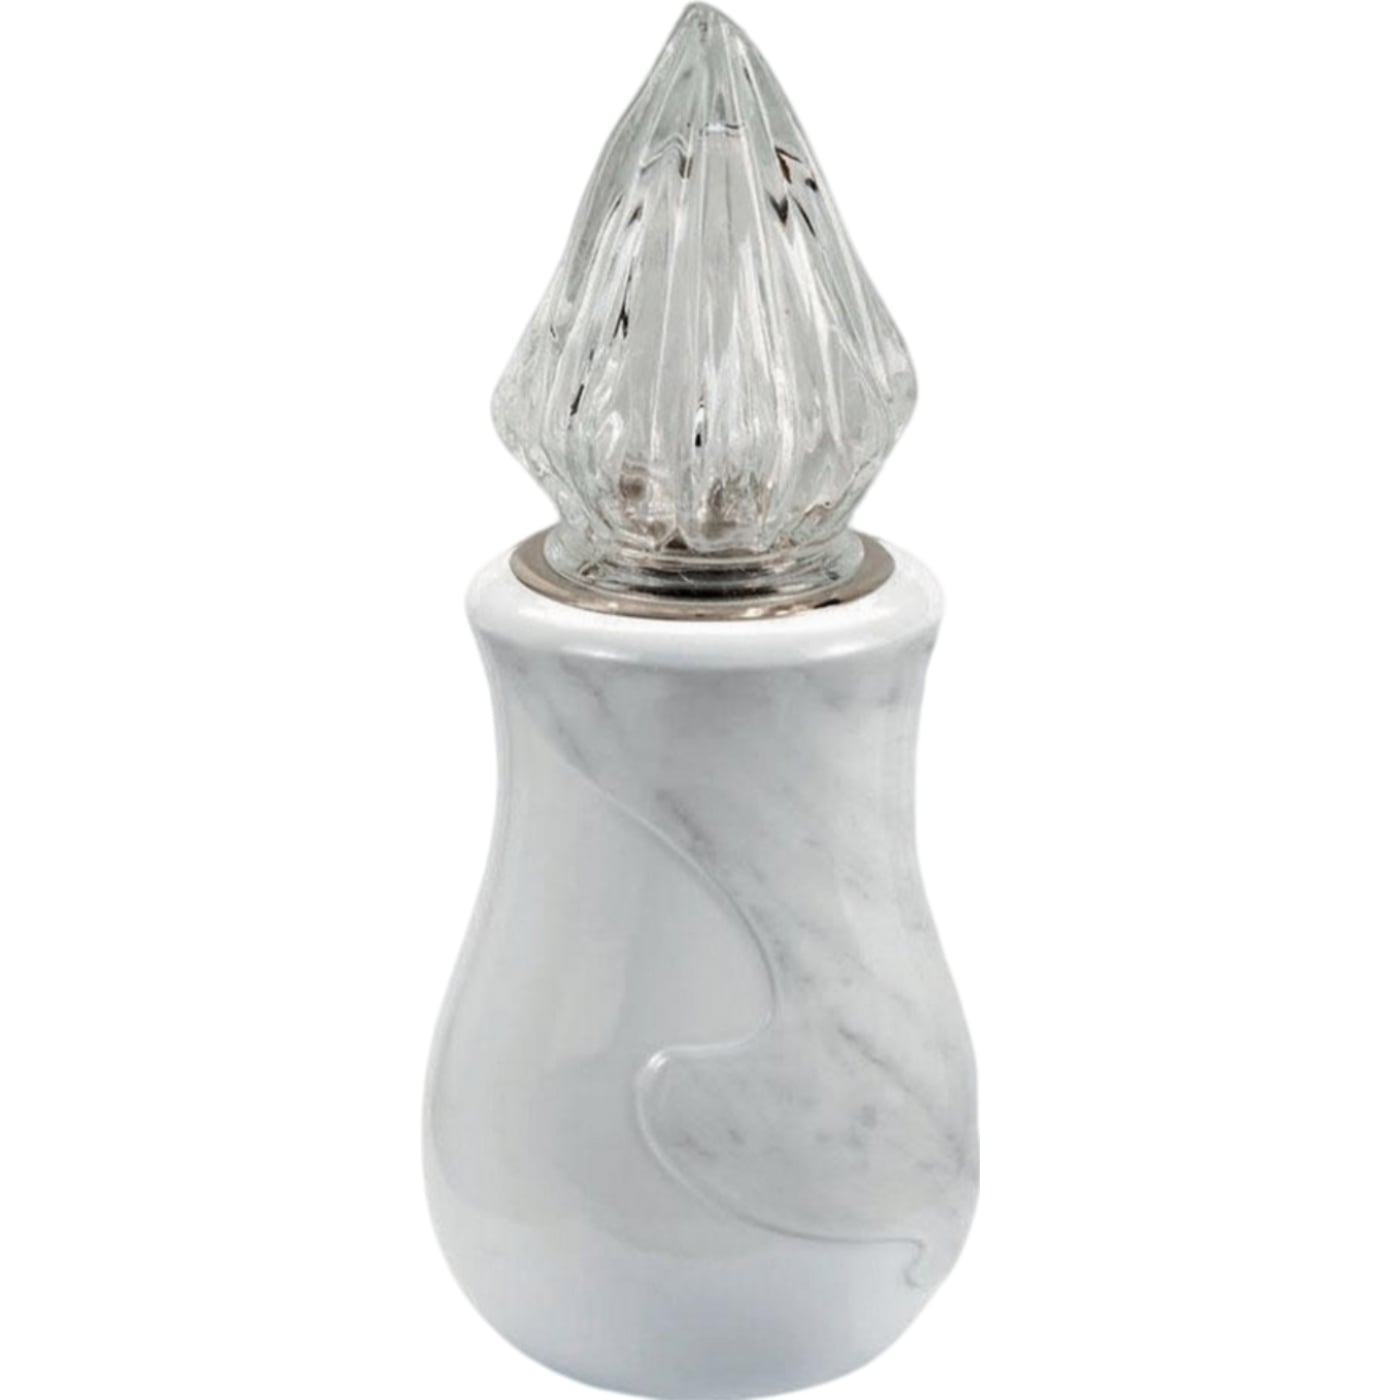 Grave light Anna carrara 10x10cm - 3.9x3.9in In white porcelain with carrara decoration, ground attached ANN136T/CARR